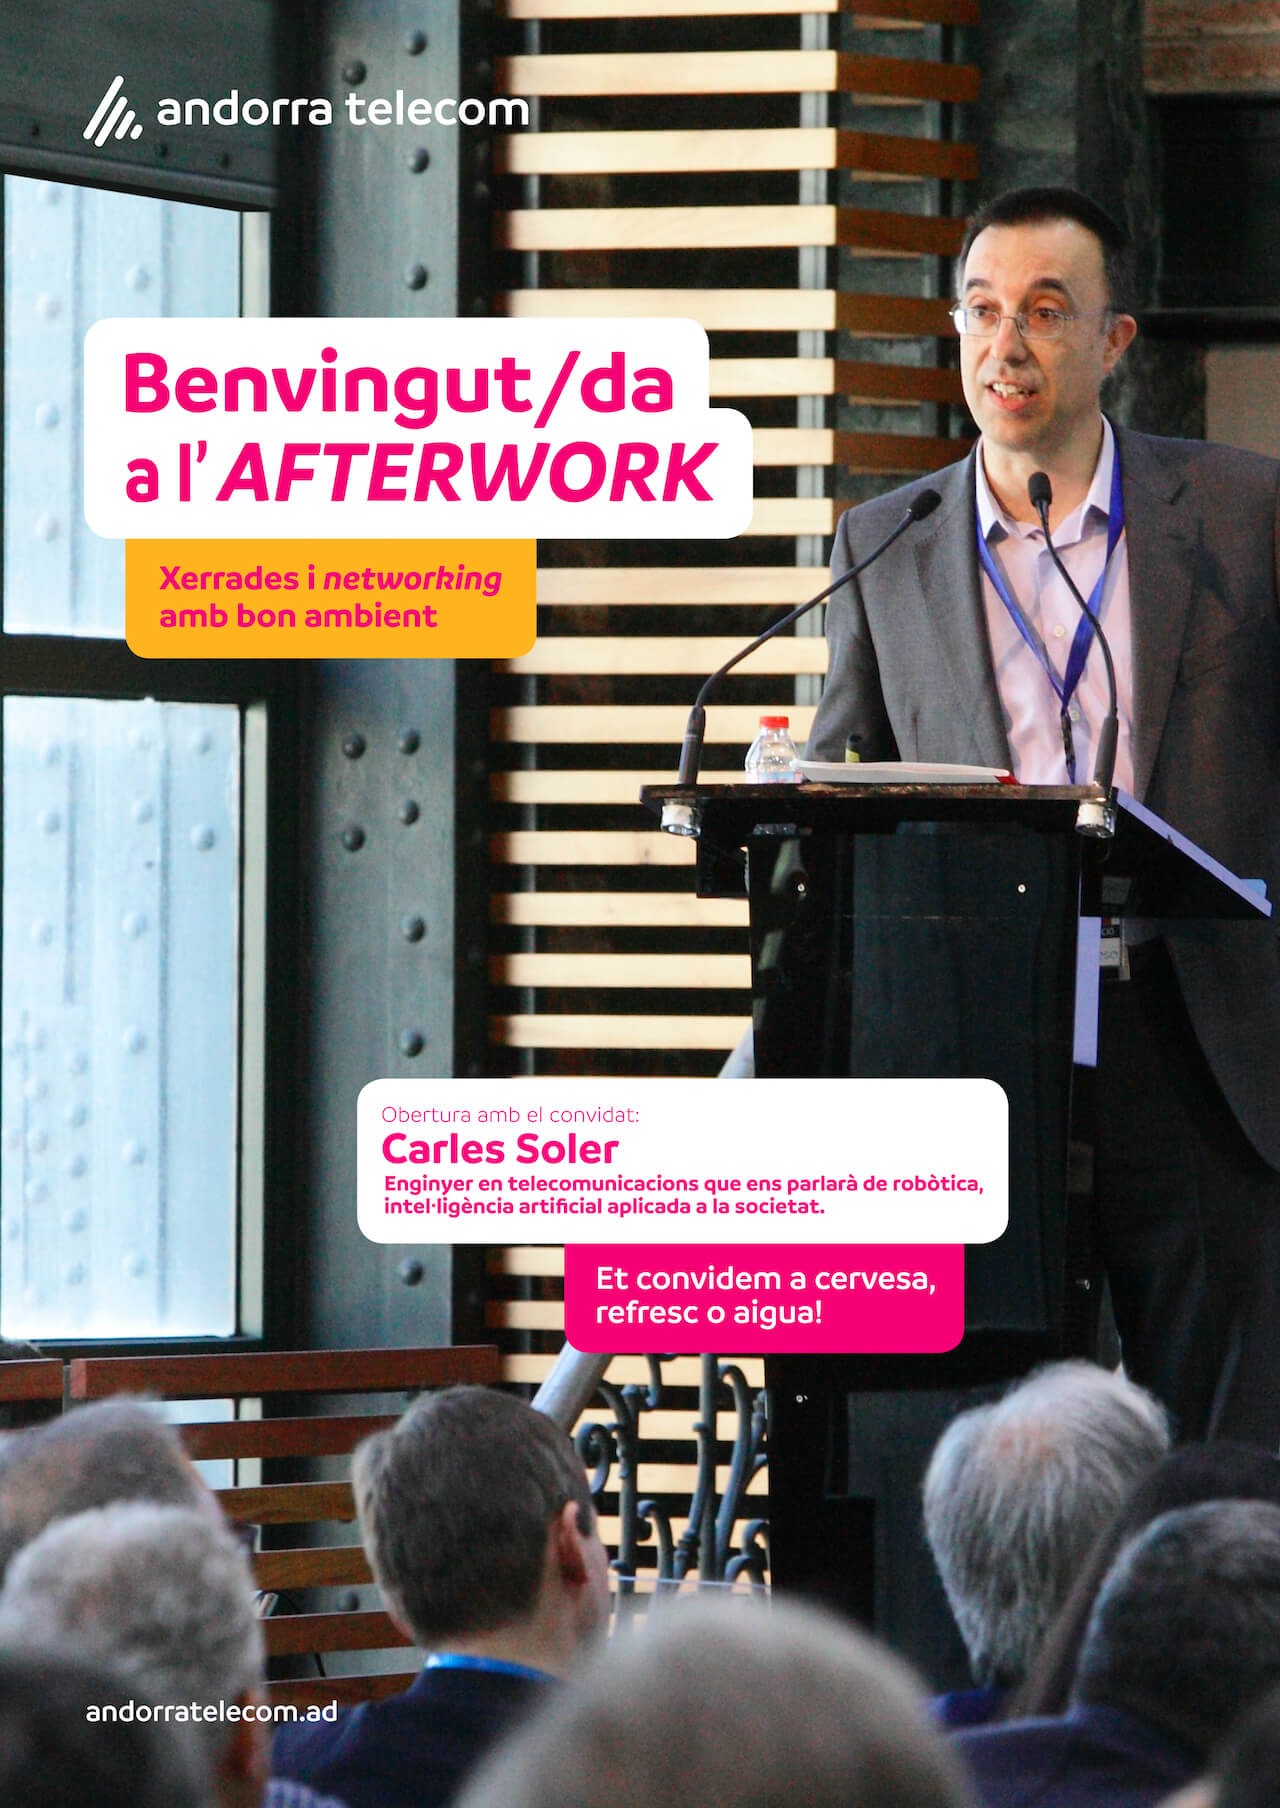 5th afterwork with Carles Soler